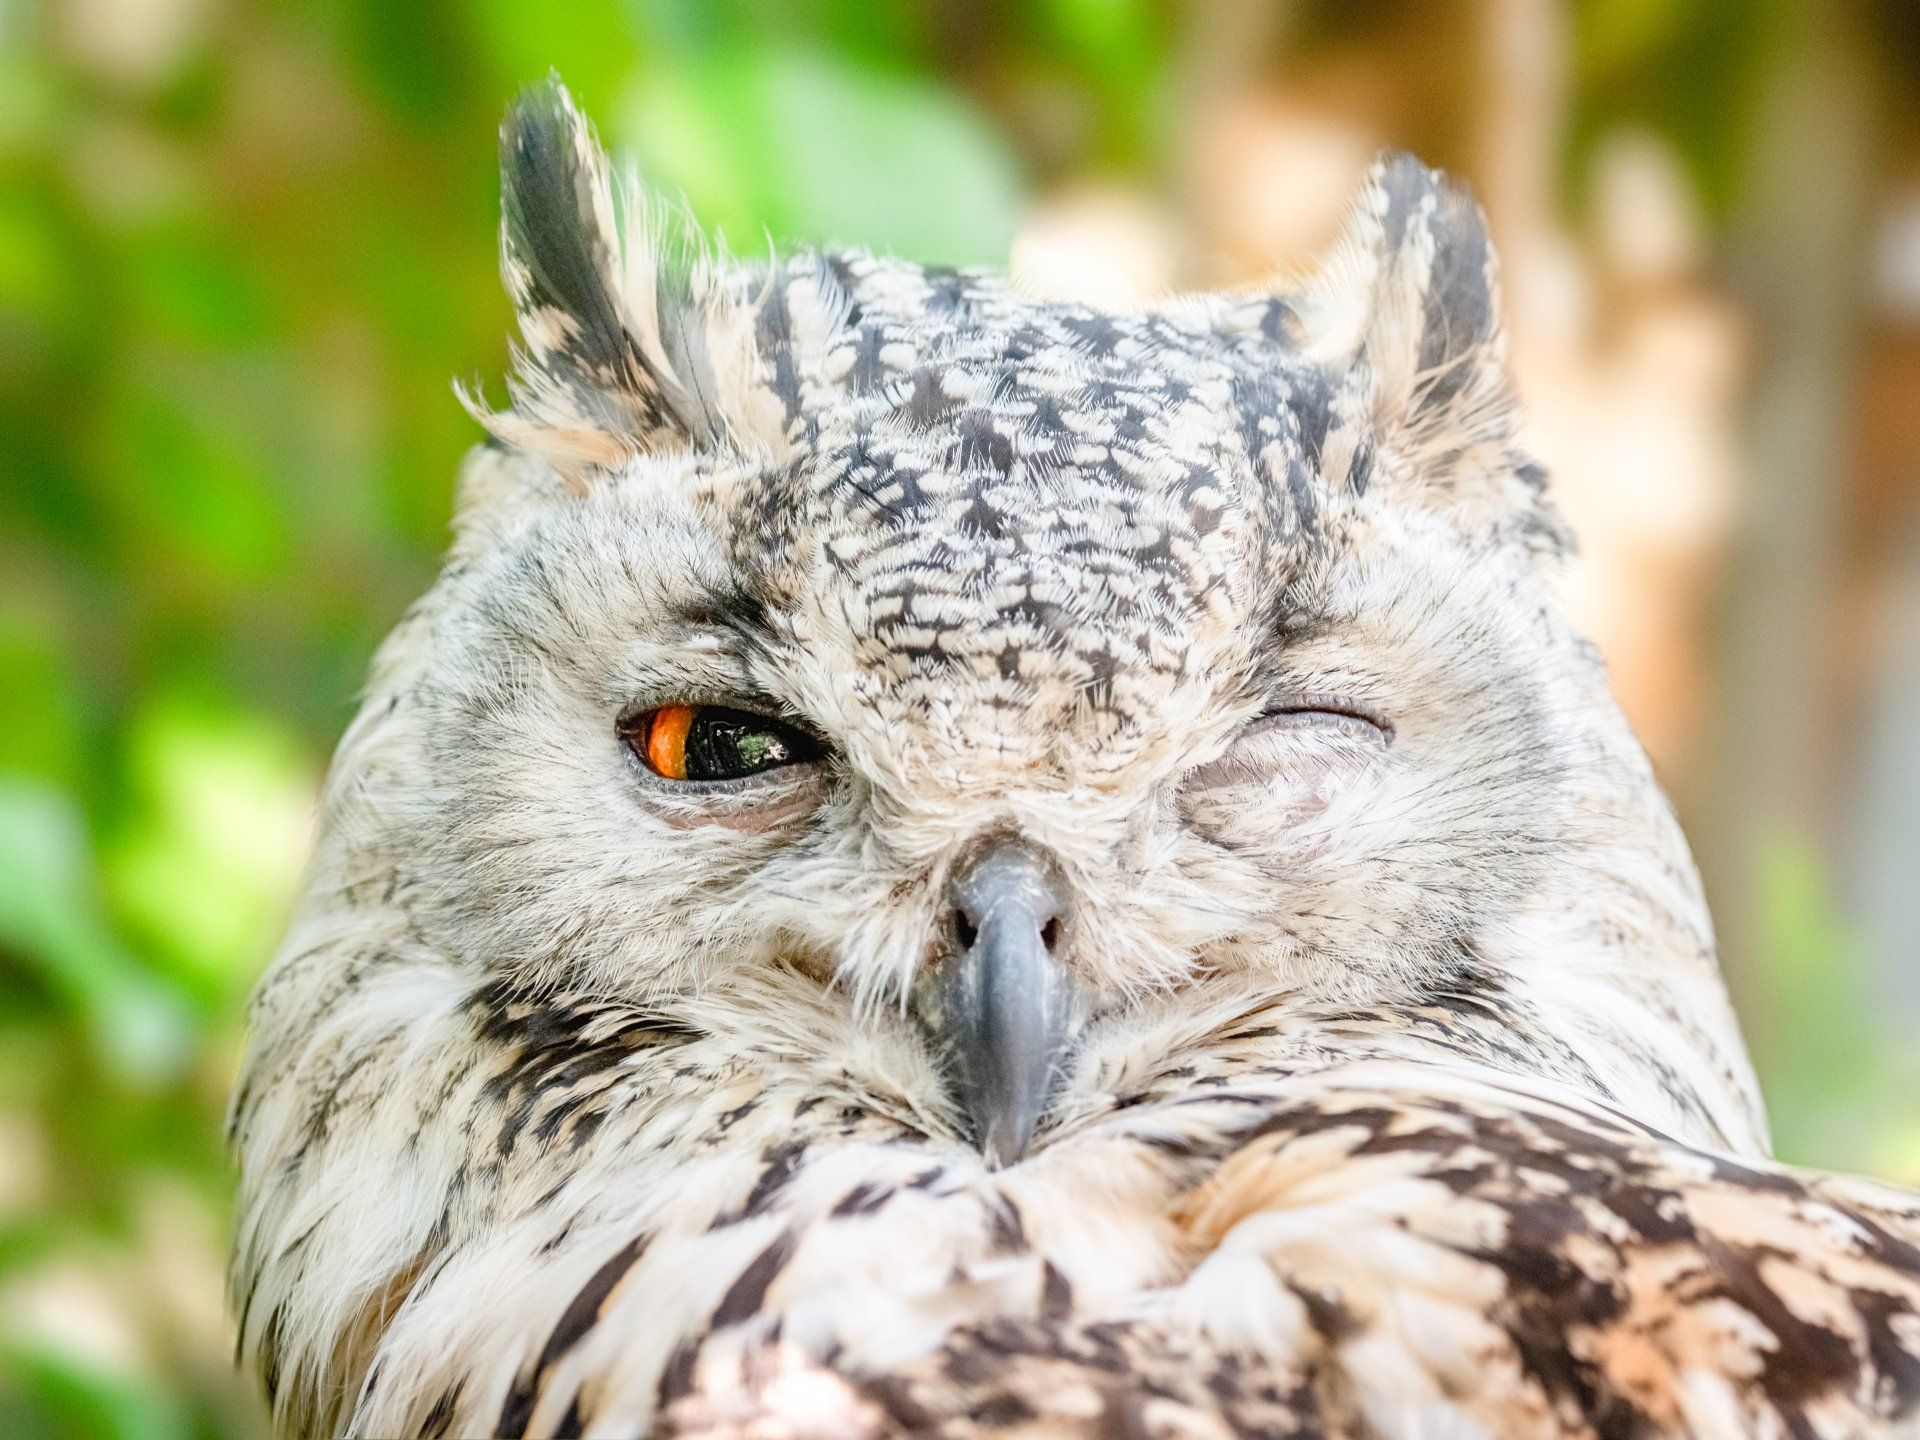 a close up of an owl with its eyes closed .